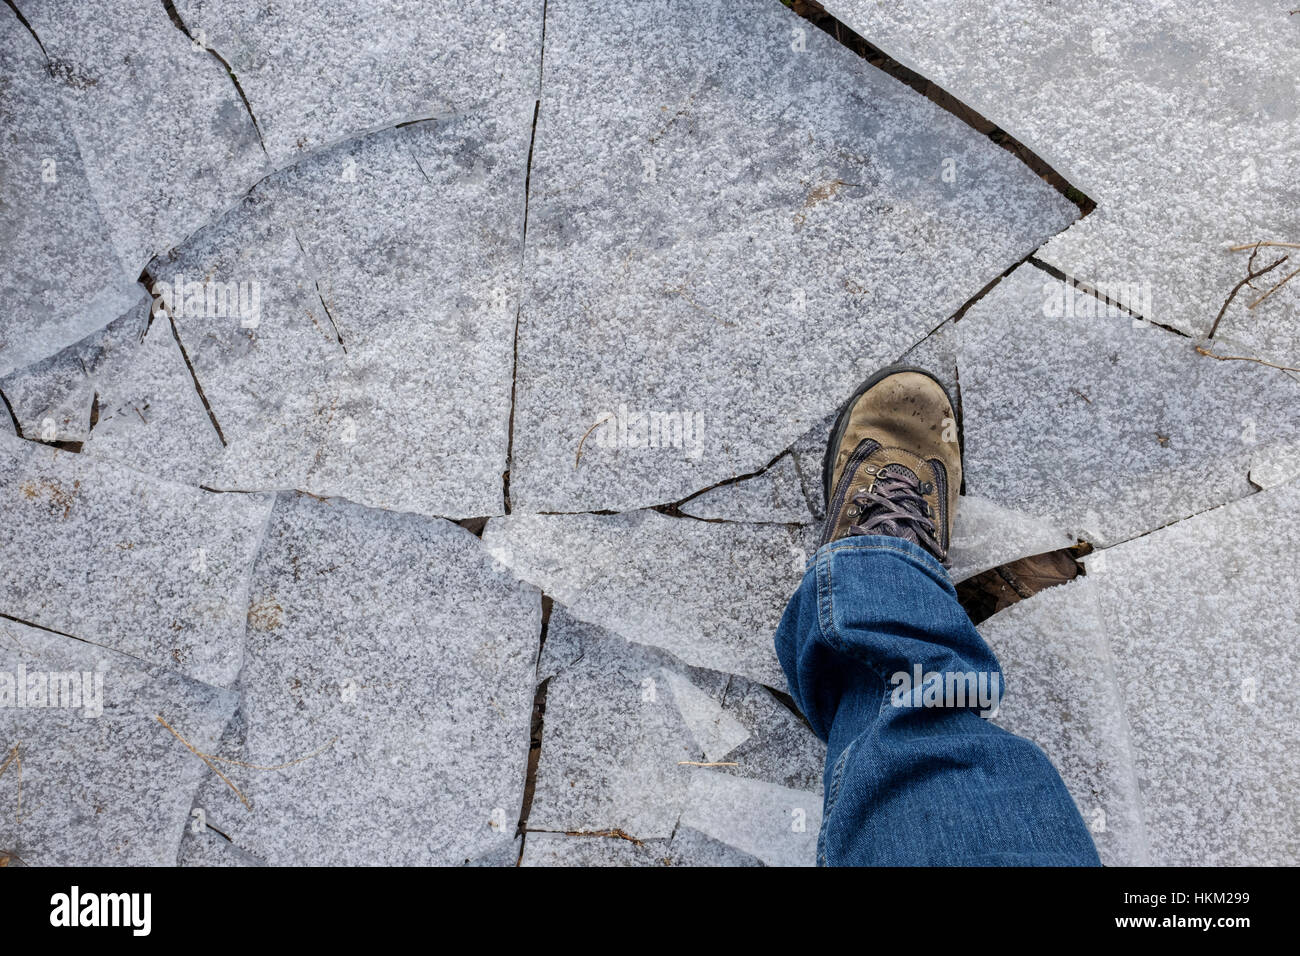 Male foot wearing a boot steps on thin cracked ice in a trail in winter. Stock Photo